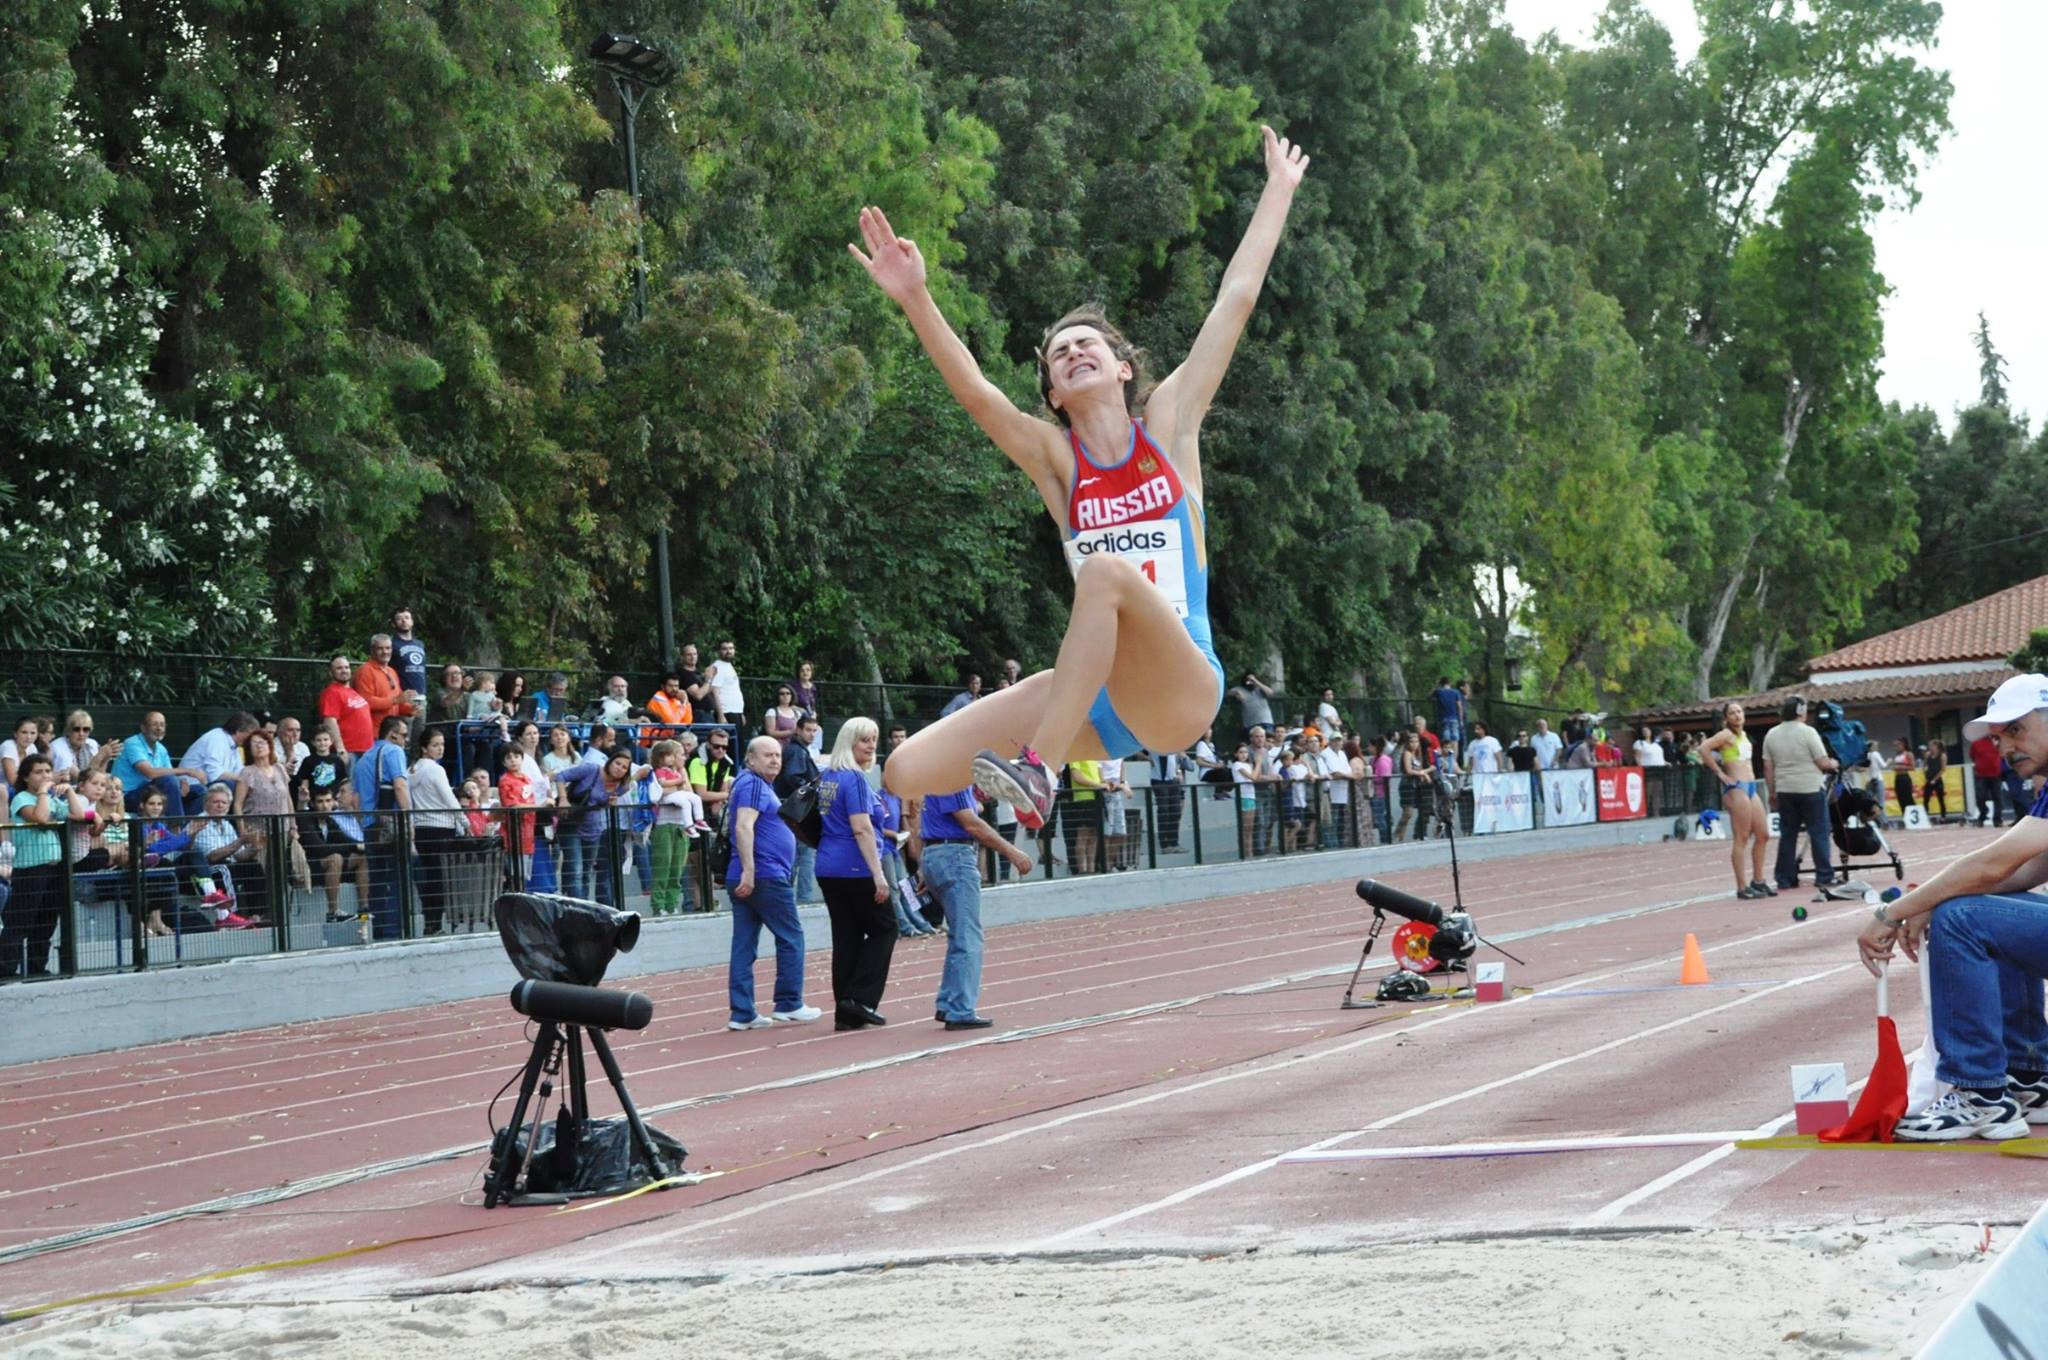 Long jumper Yelena Mashinistova has been suspended by RUSADA for a year for an anti-doping violation ©Facebook